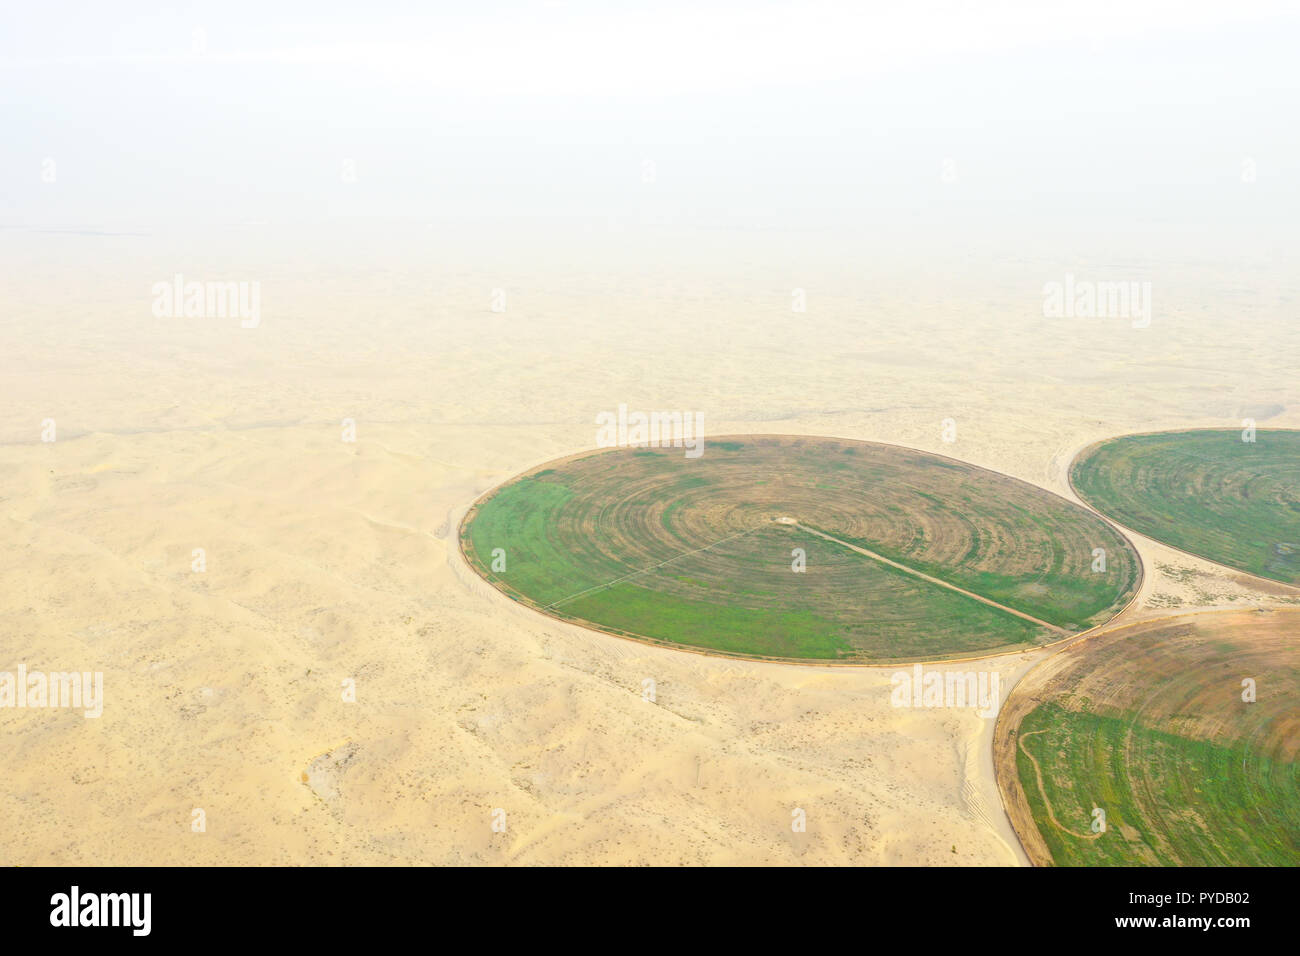 Circular green irrigation patches for agriculture in the desert. Dubai, UAE. Stock Photo